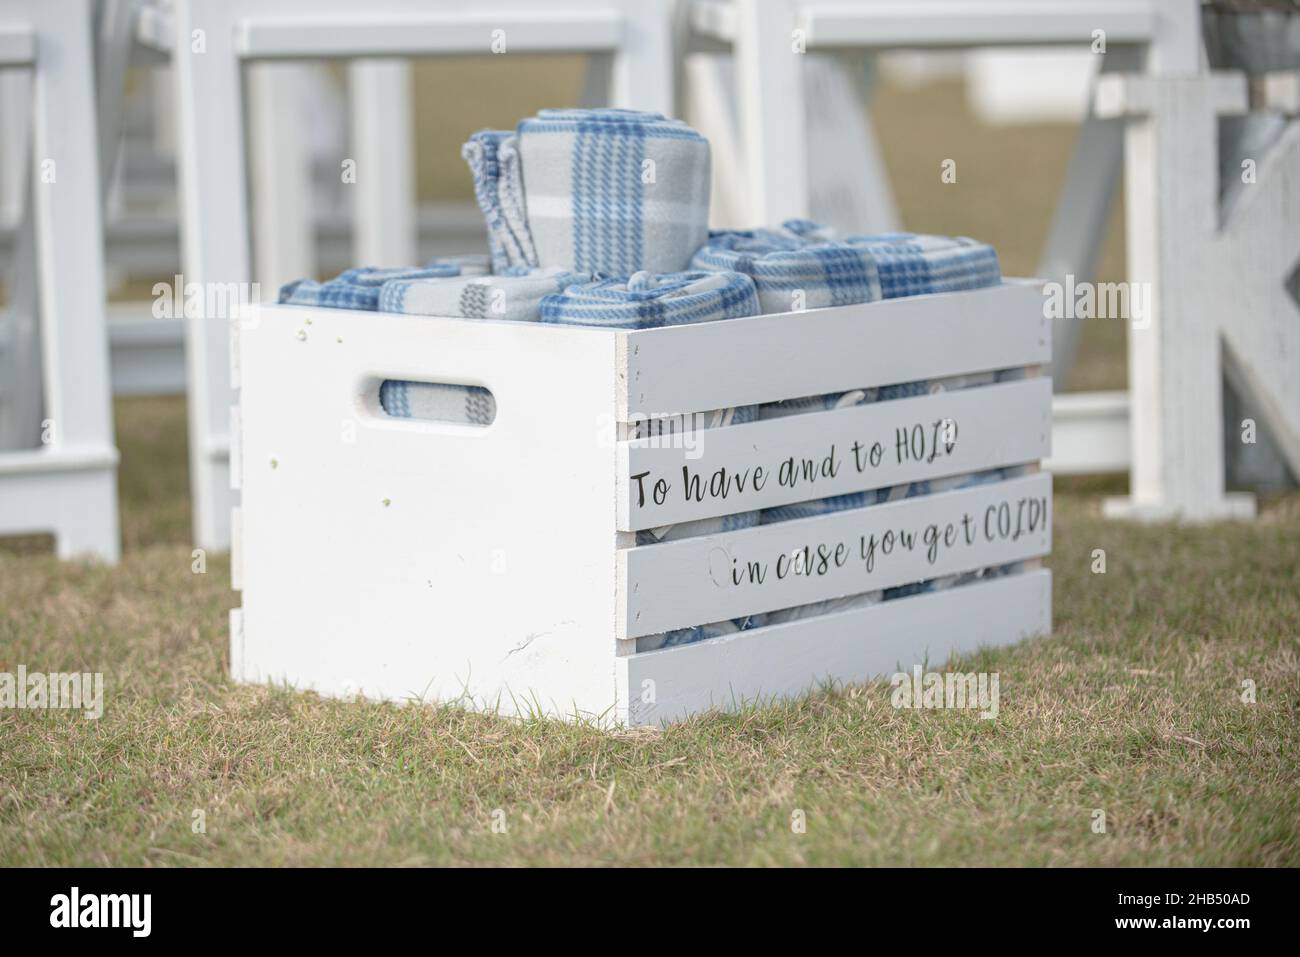 White slated crate at wedding with 'To have and to hold in case you get cold' text containing rolled up guest blankets Stock Photo